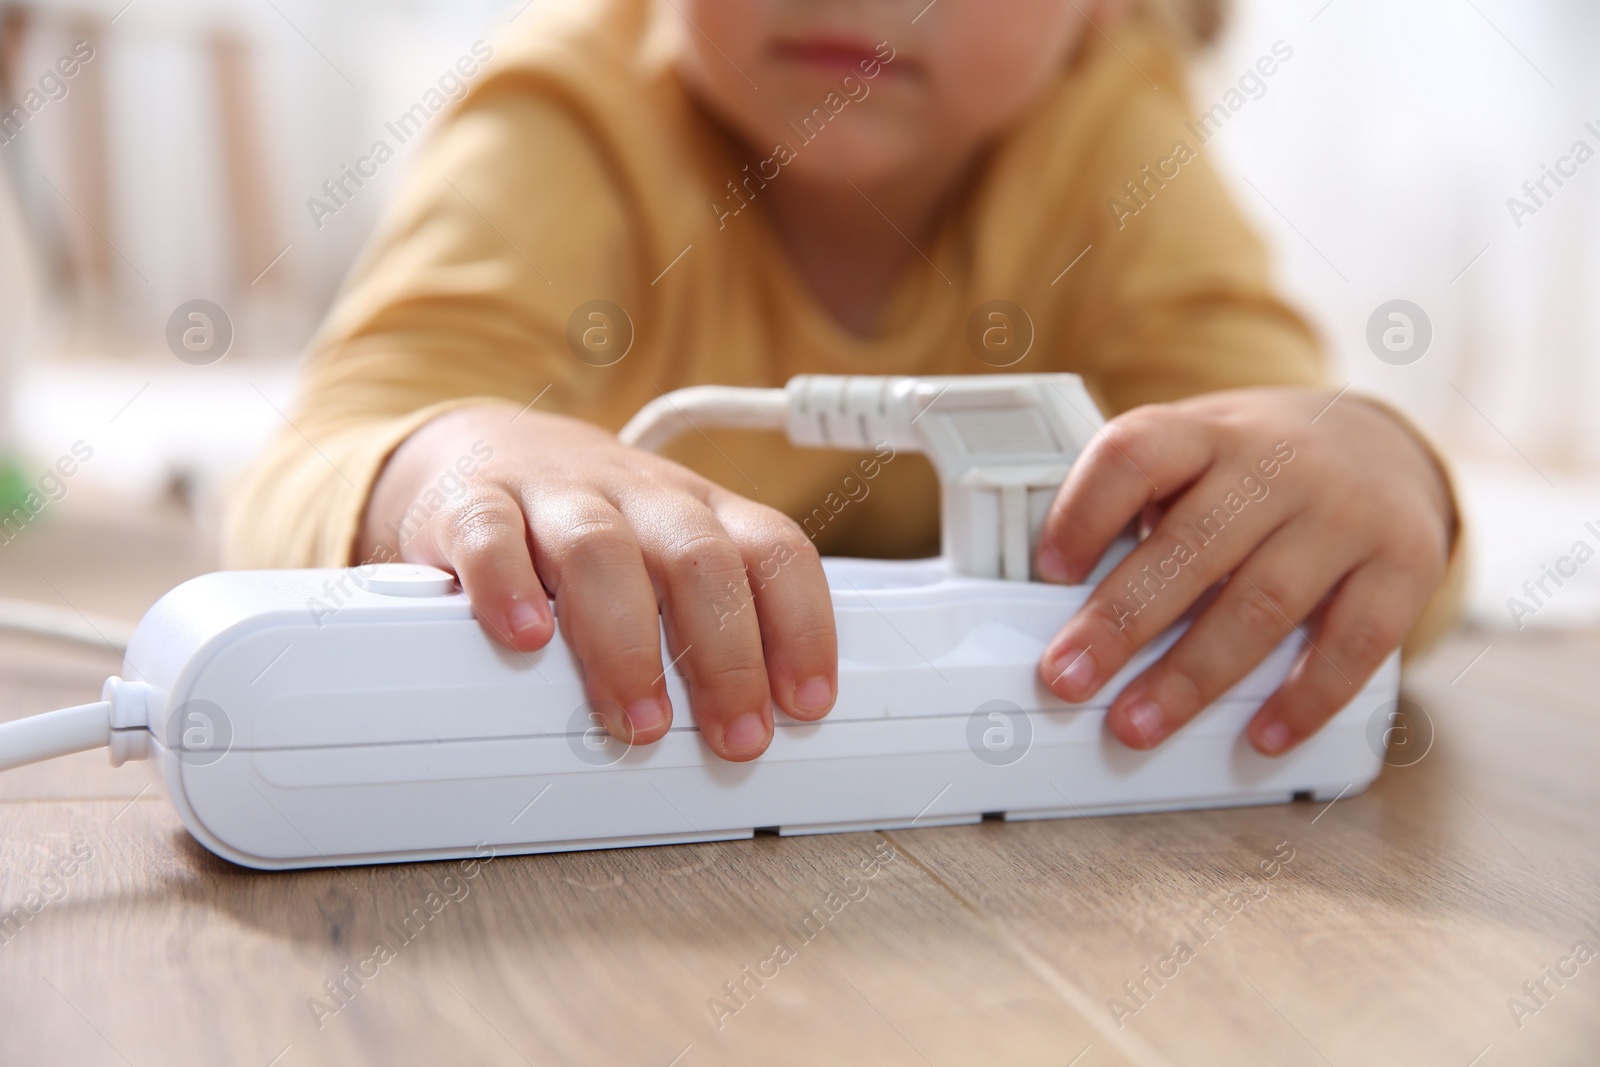 Photo of Little child playing with power strip and plug on floor indoors, closeup. Dangerous situation